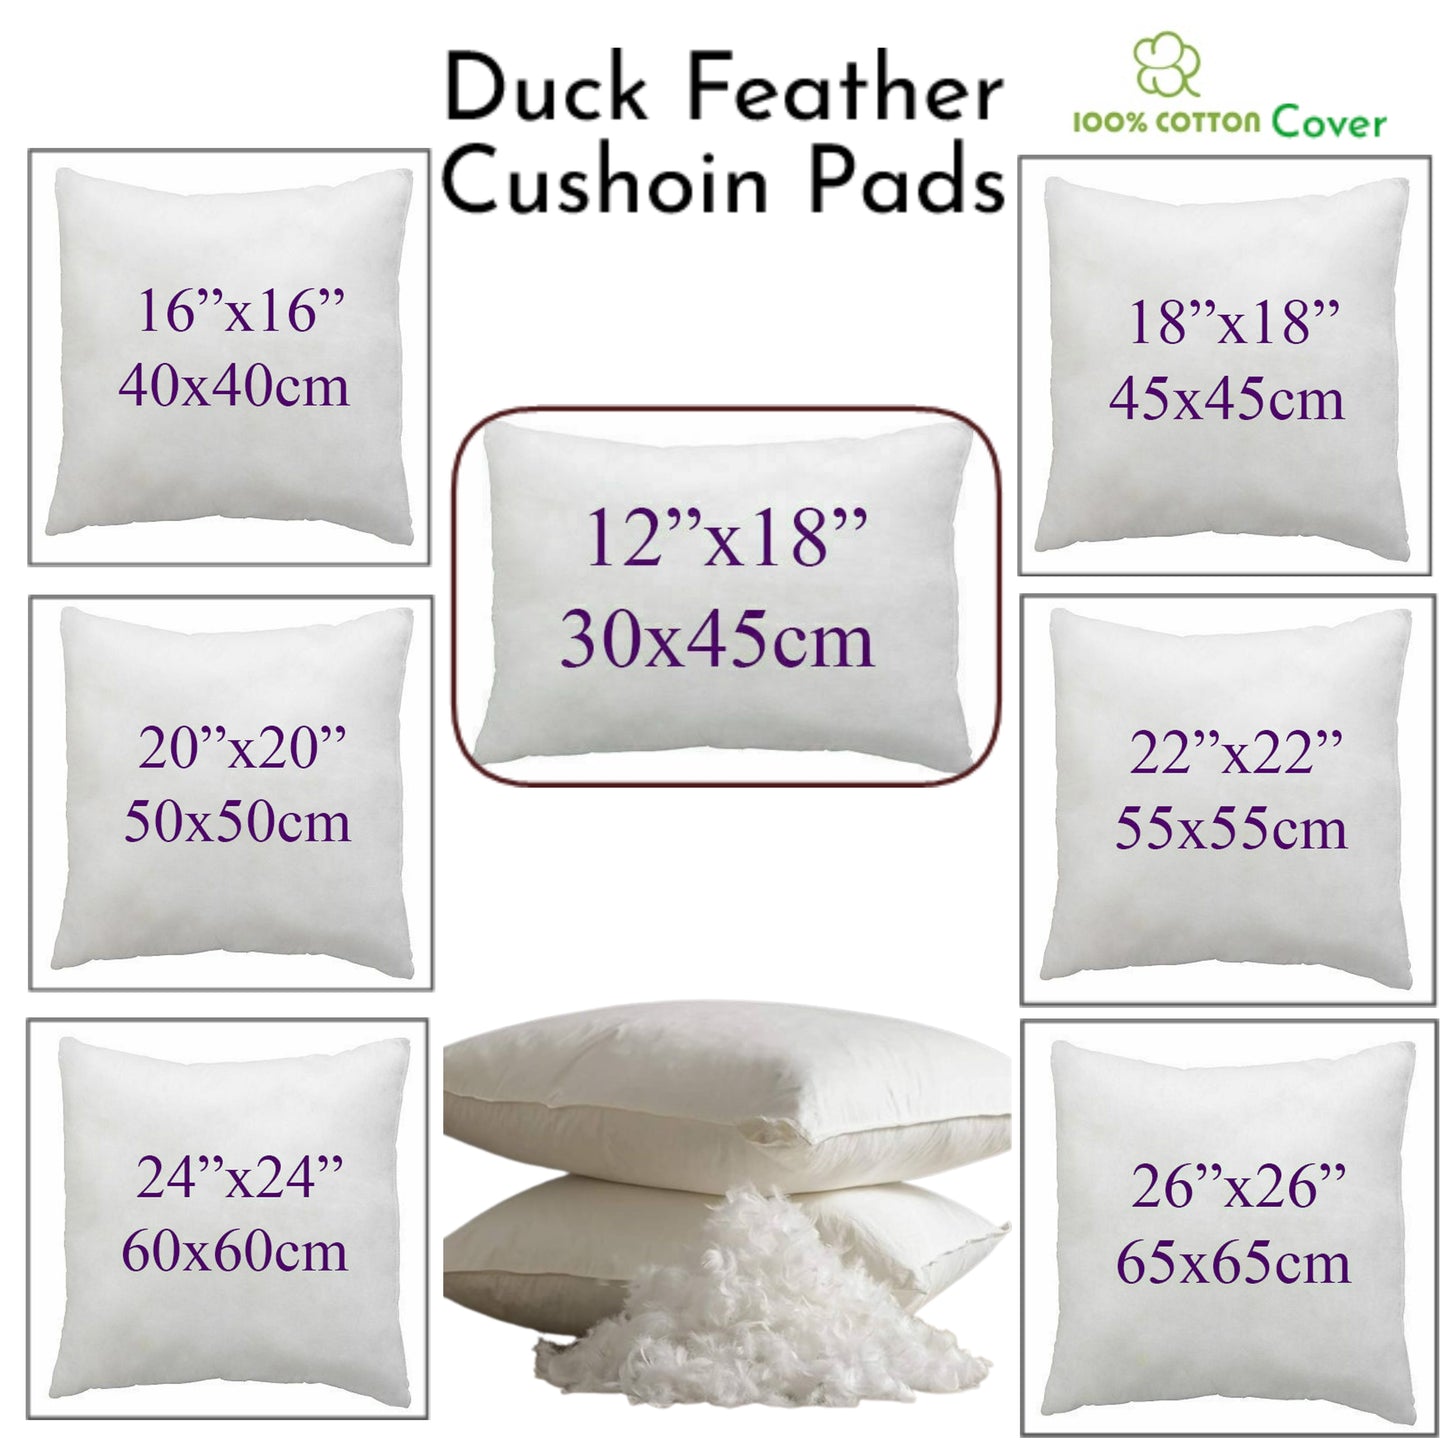 Duck Feather Cushion Pad Inner Insert Filler Scatter 100% Cotton Cover Extra Filled Plump Square Cushion